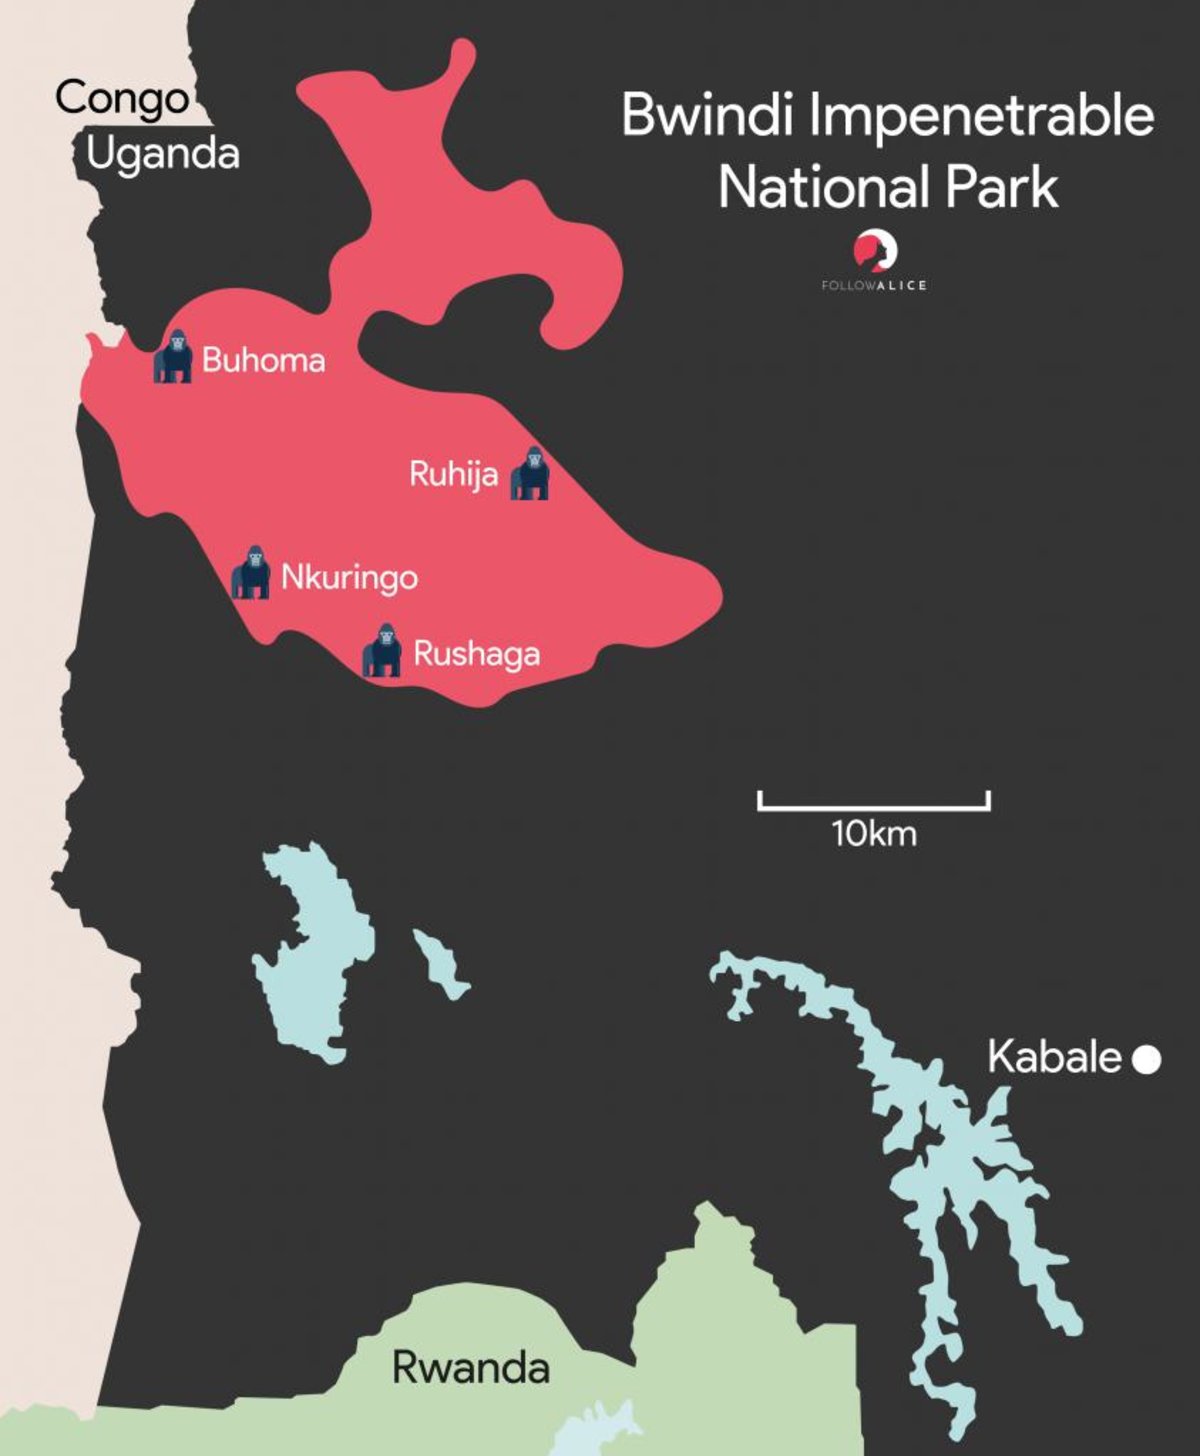 Follow Alice map of the different sections of Bwindi Impenetrable National Park in western Uganda